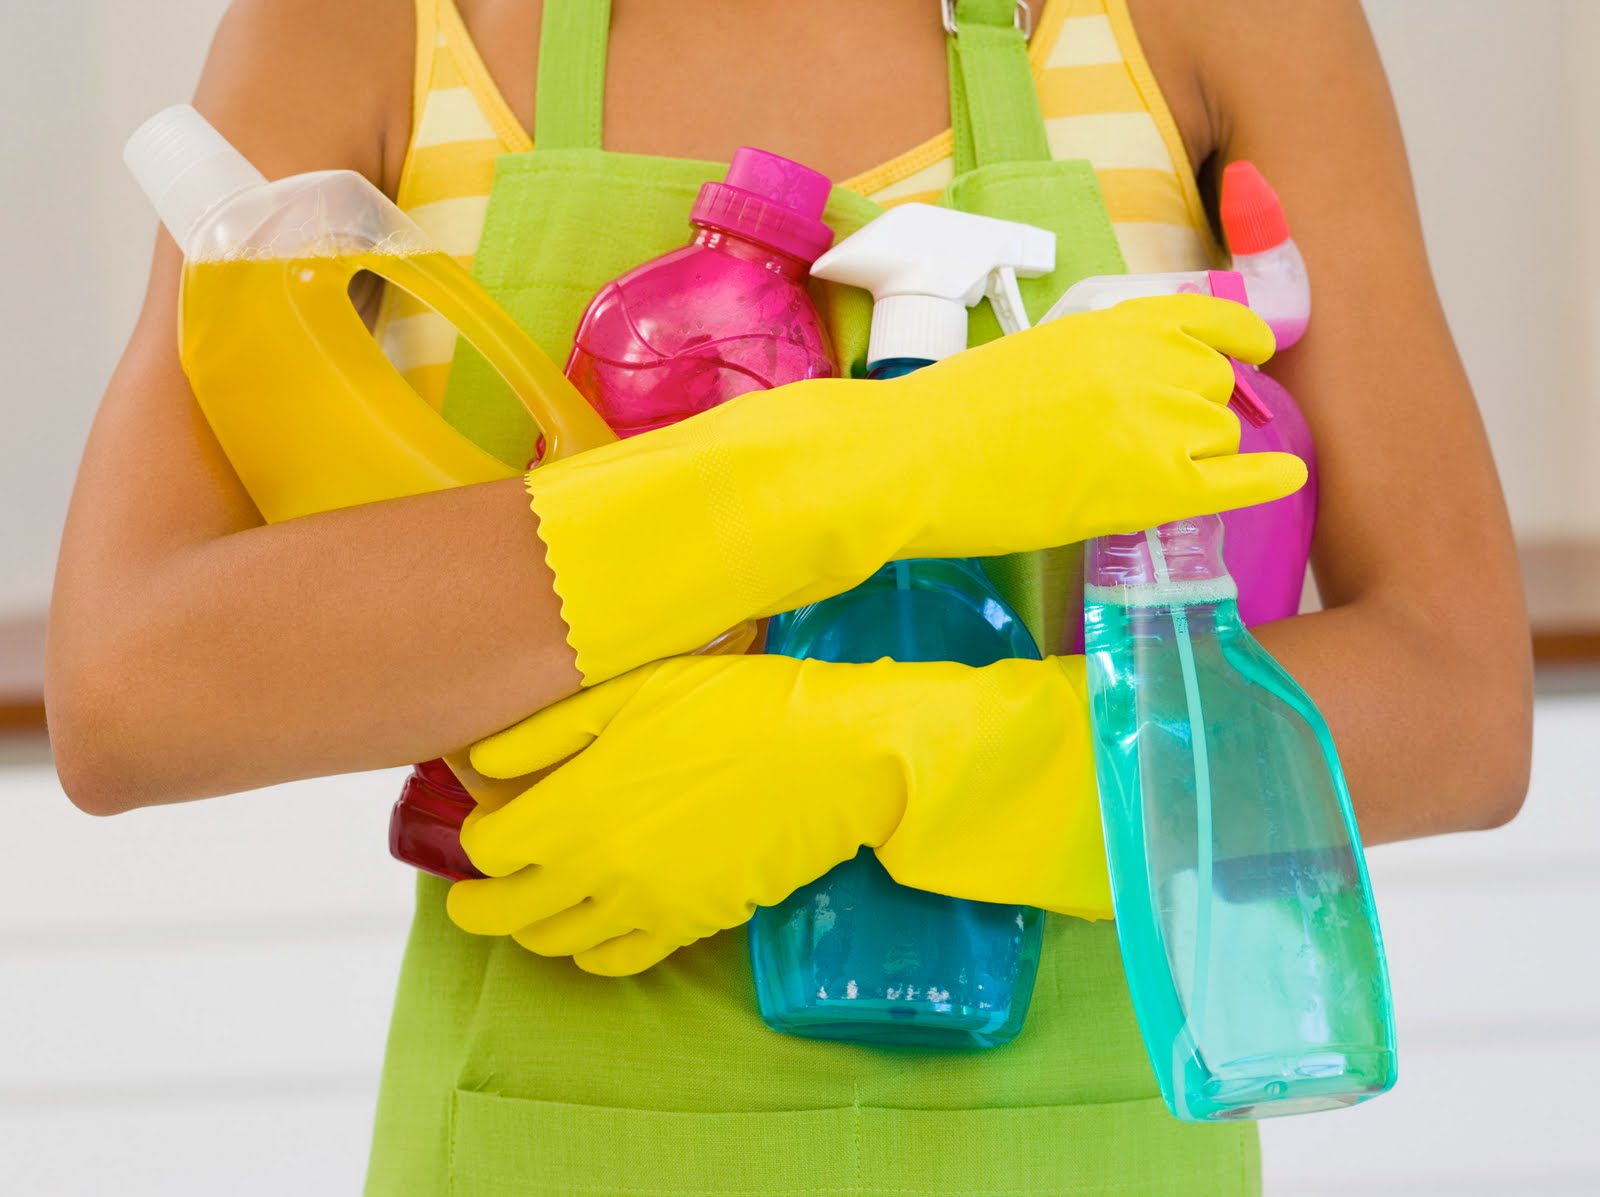 Top 10 Cleaning Tips From the Pros3